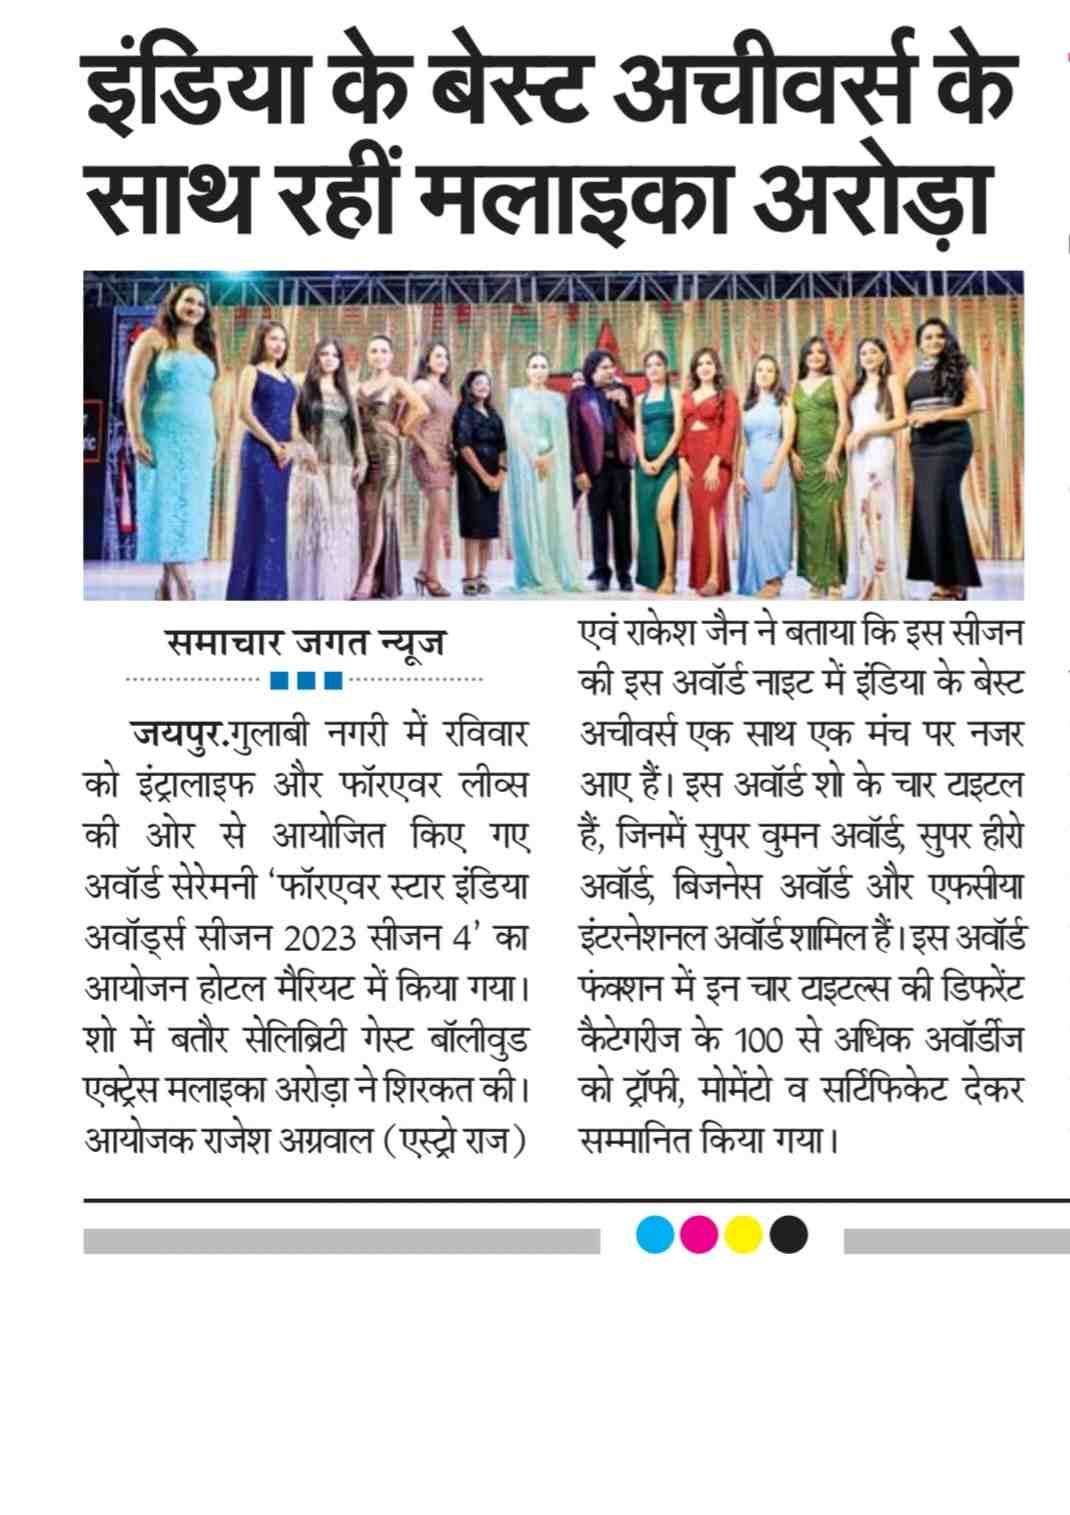 Malaika shared stage with Best Achievers of India